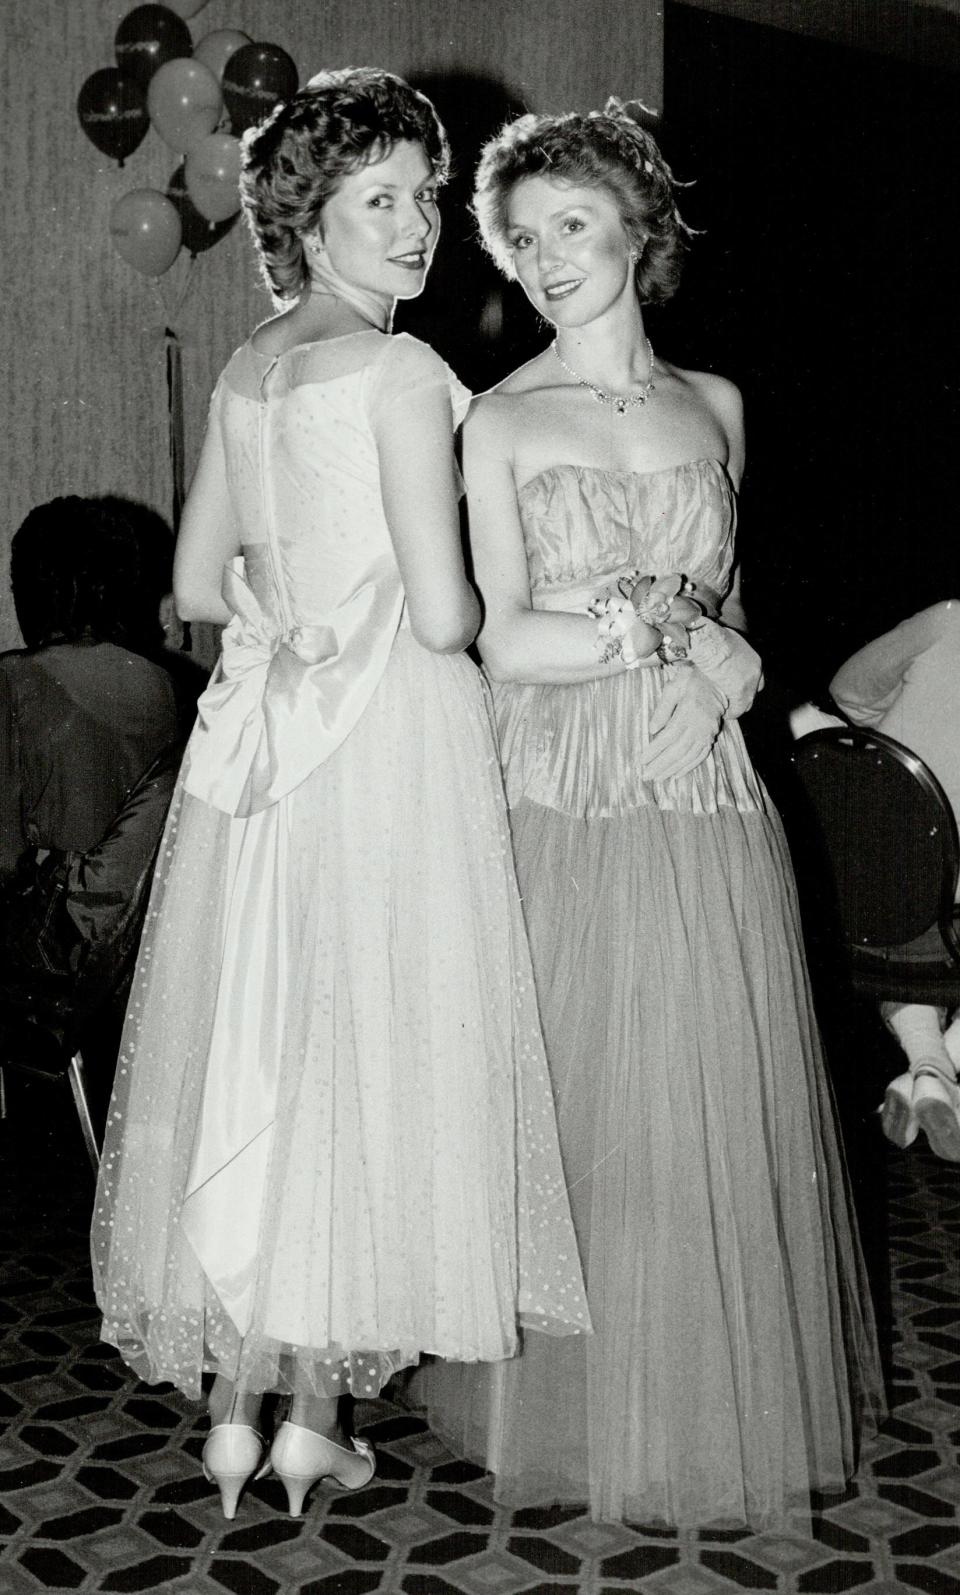 Identical twins Colleen Stanczuk and Maureen Waterworth wearing prom dresses in 1984